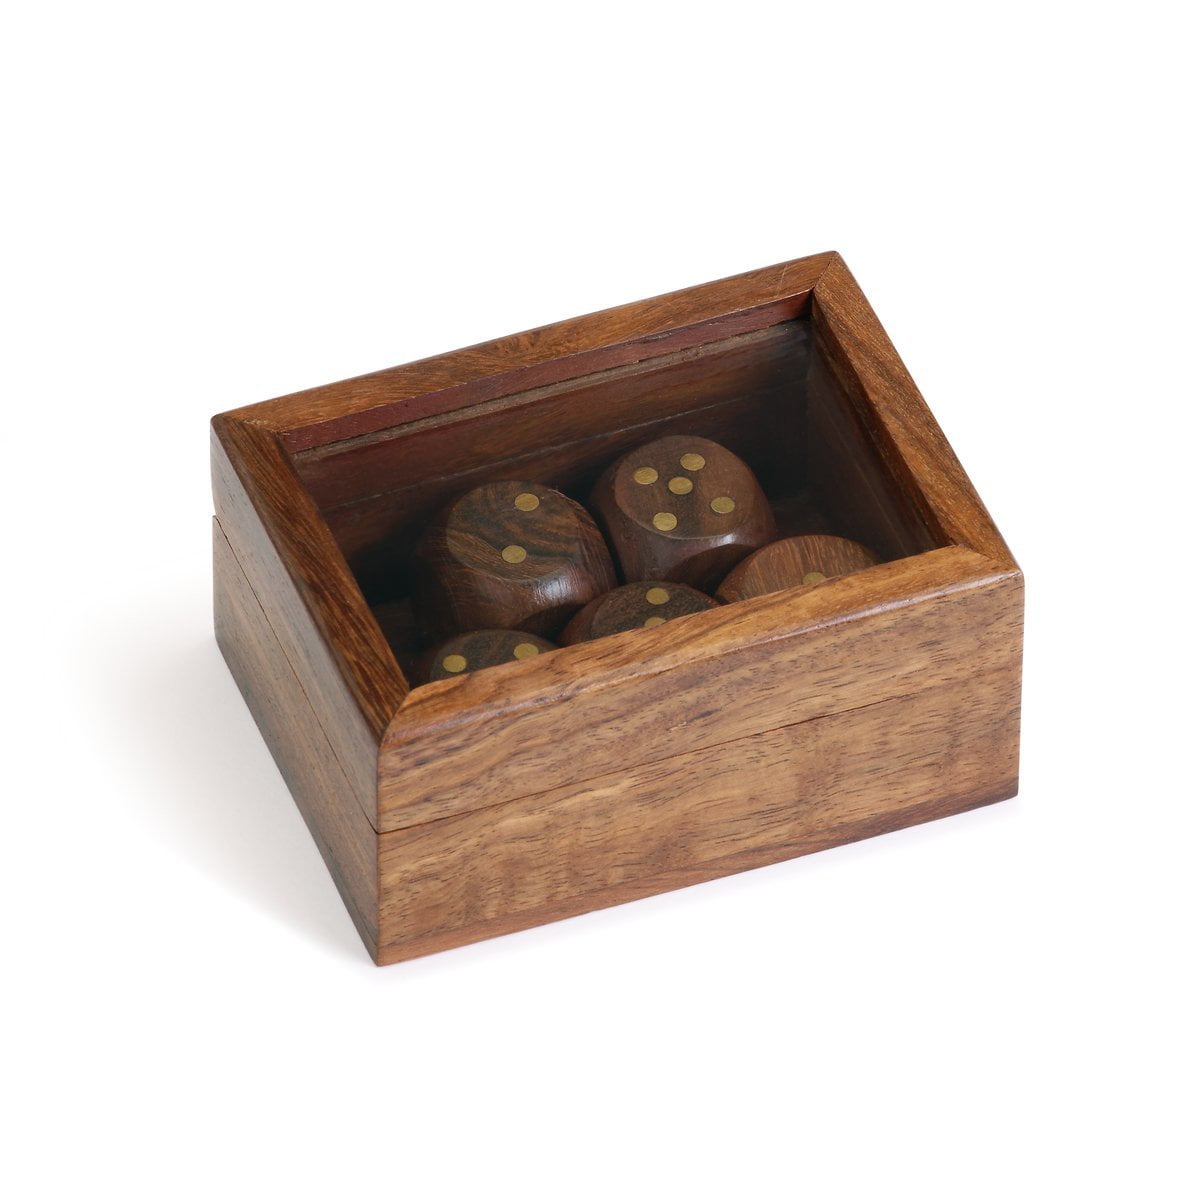 Shipping Executive Wood Dice Game by Big Sky Carvers Man Gear Free U.S 